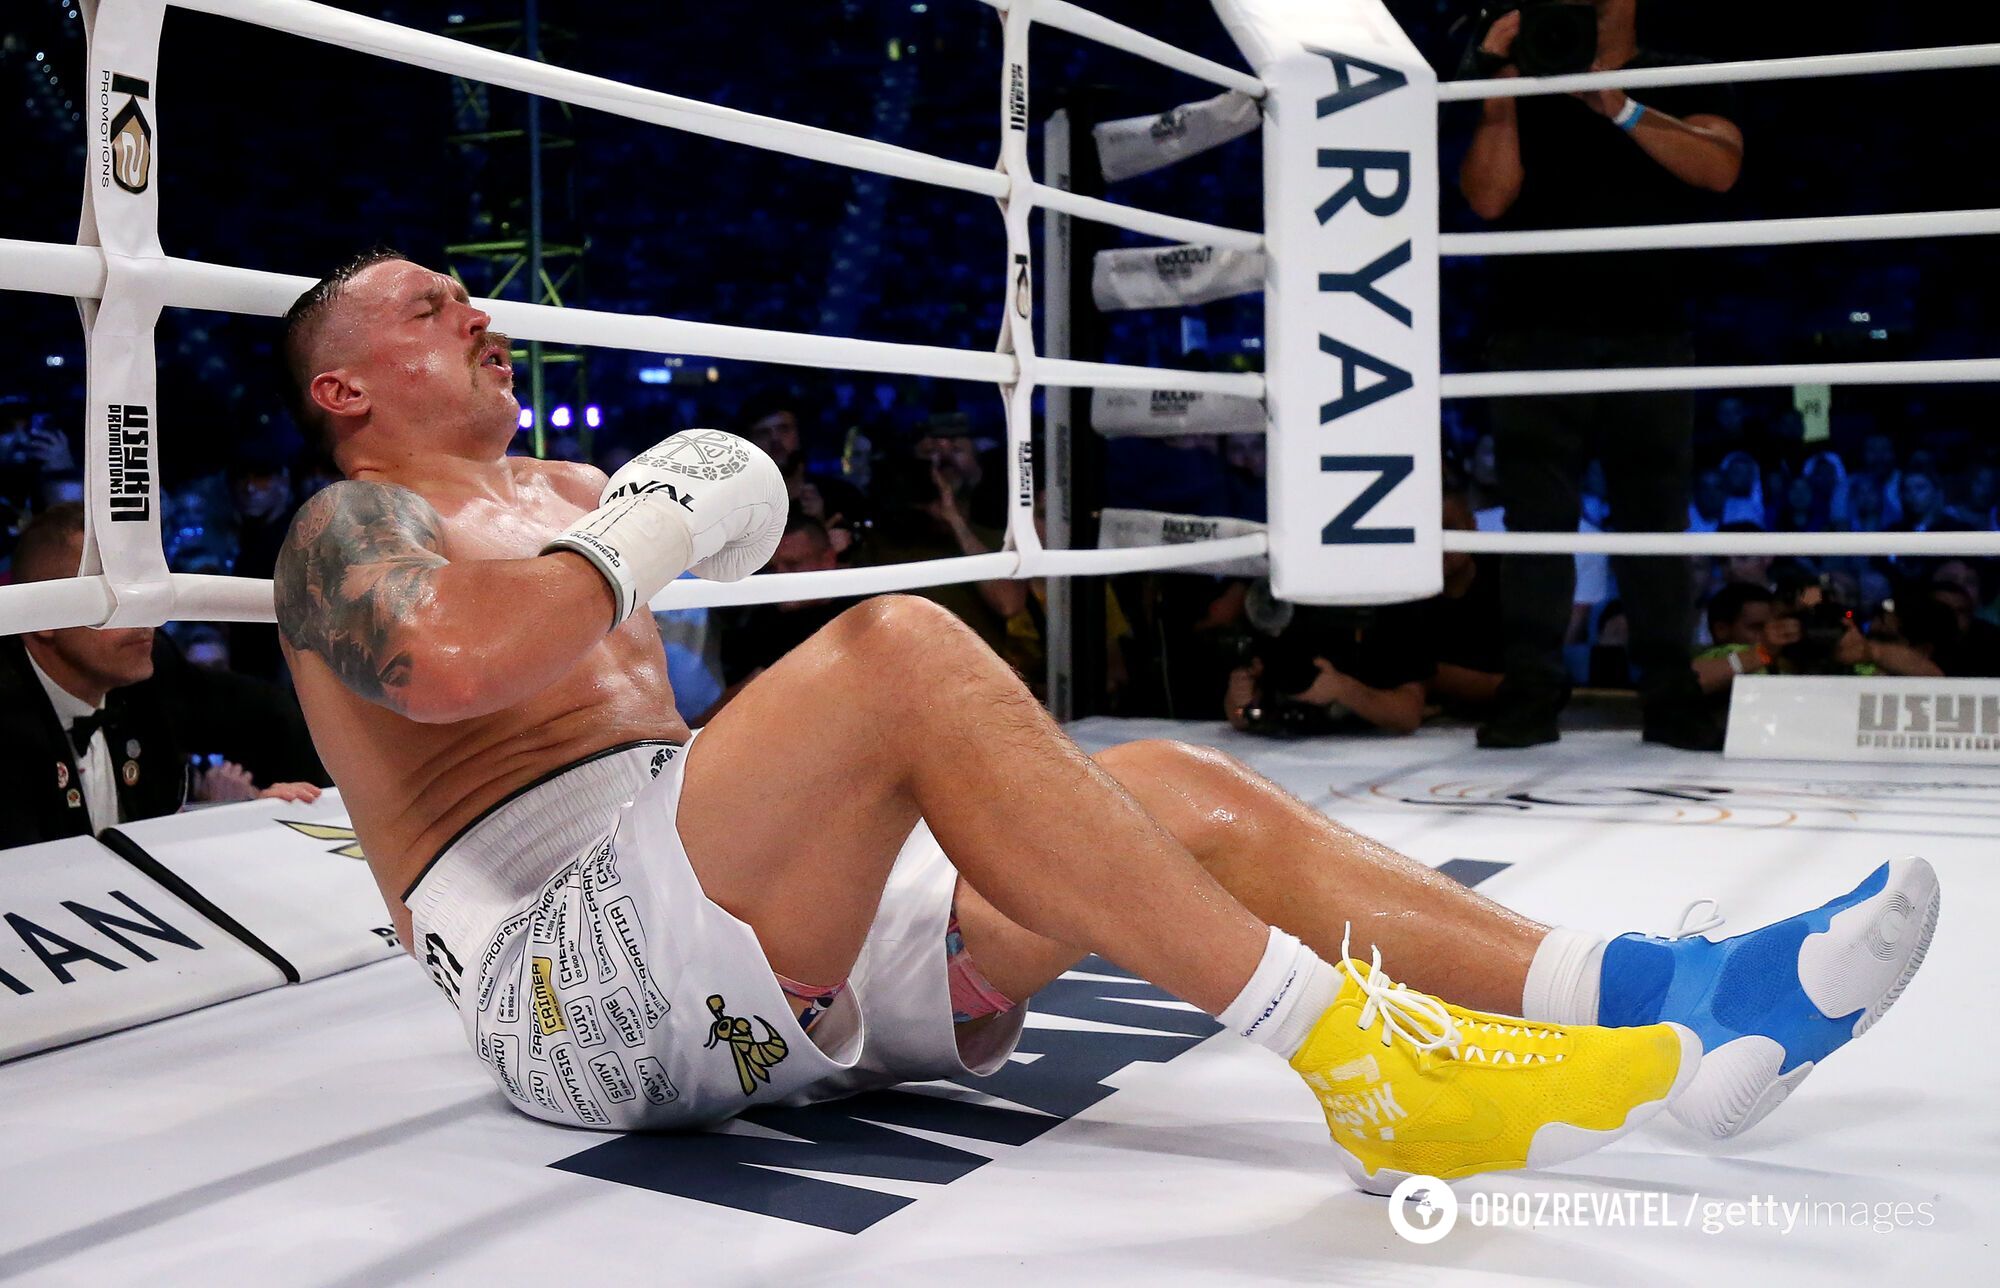 ''Caused controversy'': WBA makes official statement on Usyk-Dubois fight